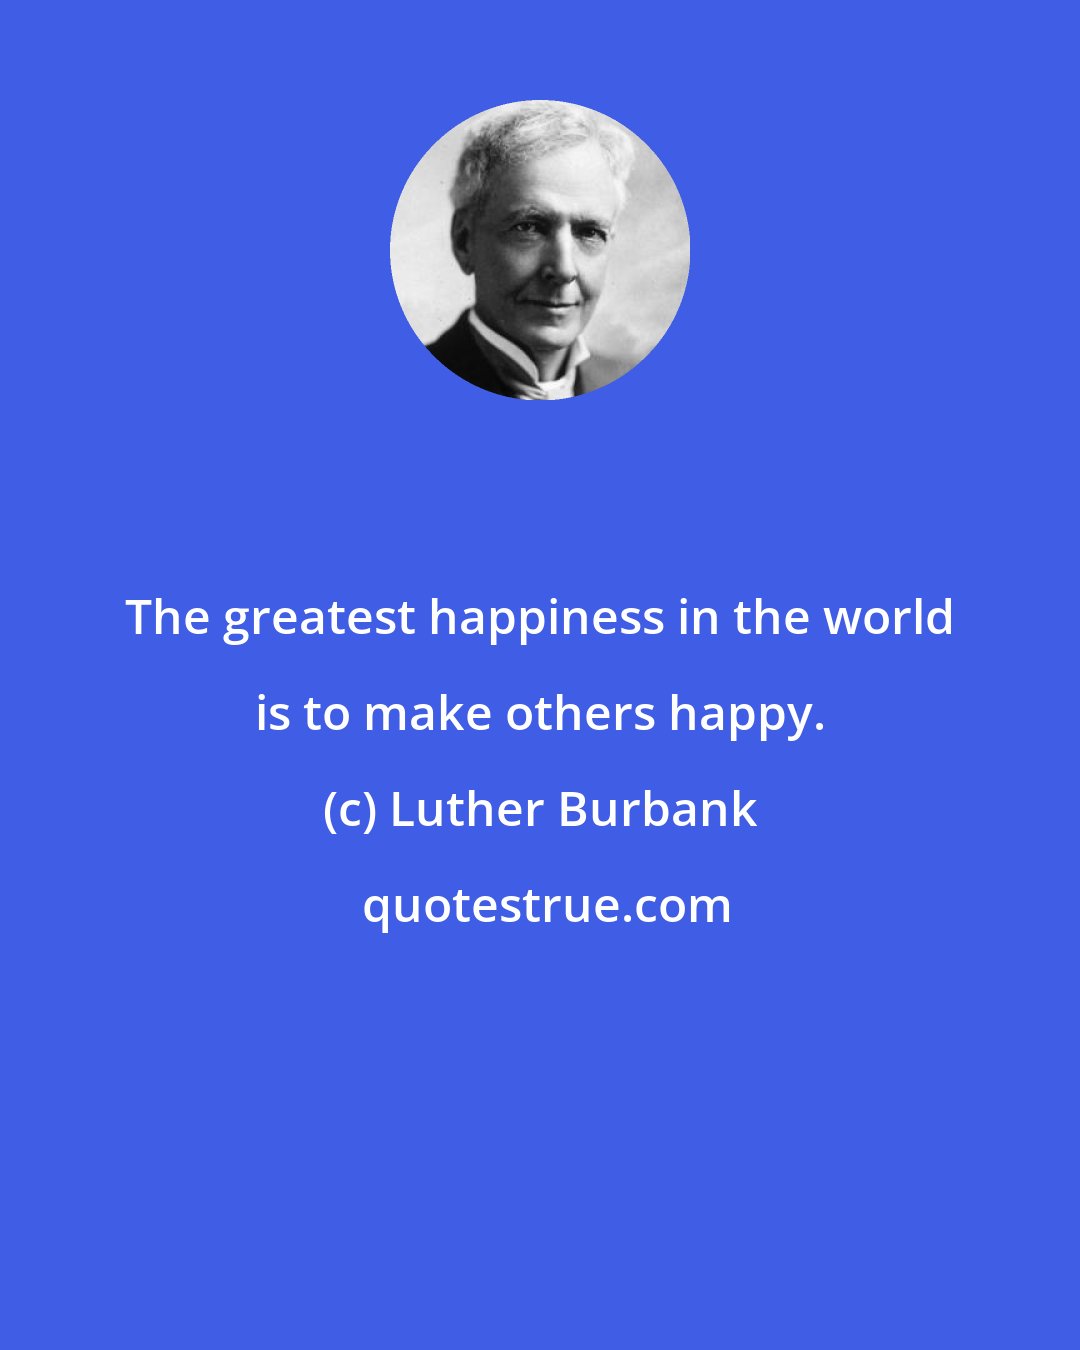 Luther Burbank: The greatest happiness in the world is to make others happy.